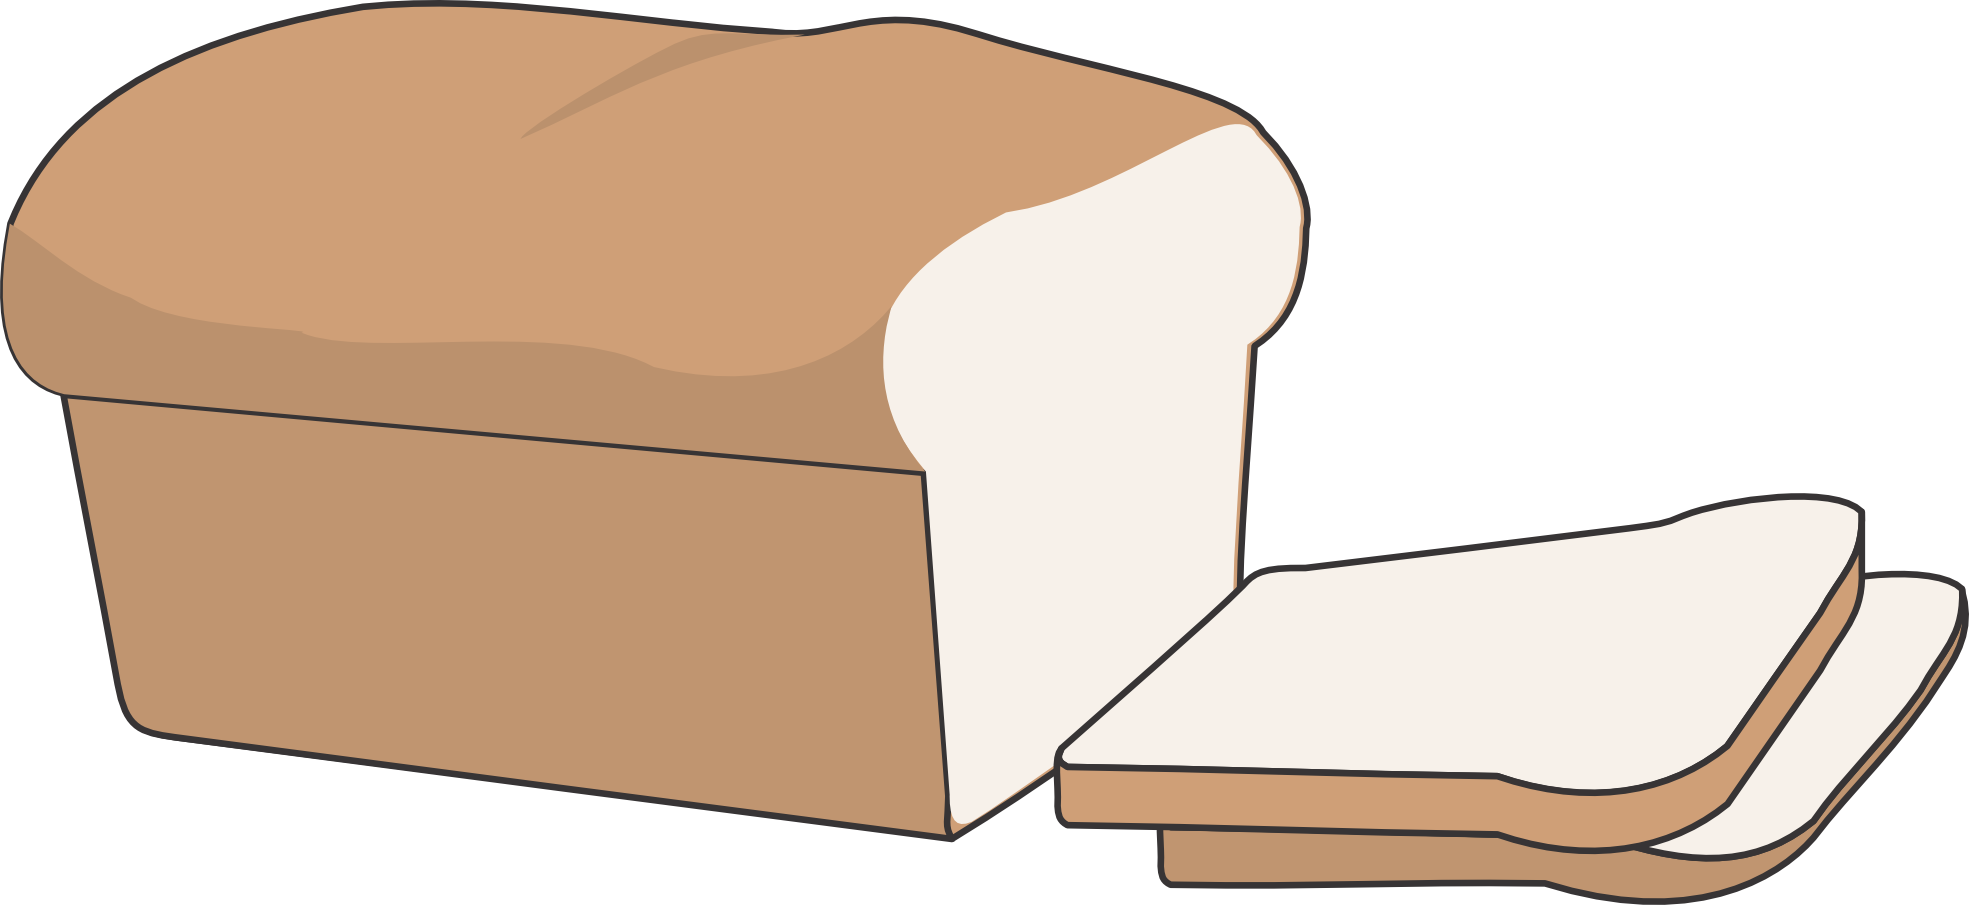 Loaf Vector Bread HQ Image Free PNG Image